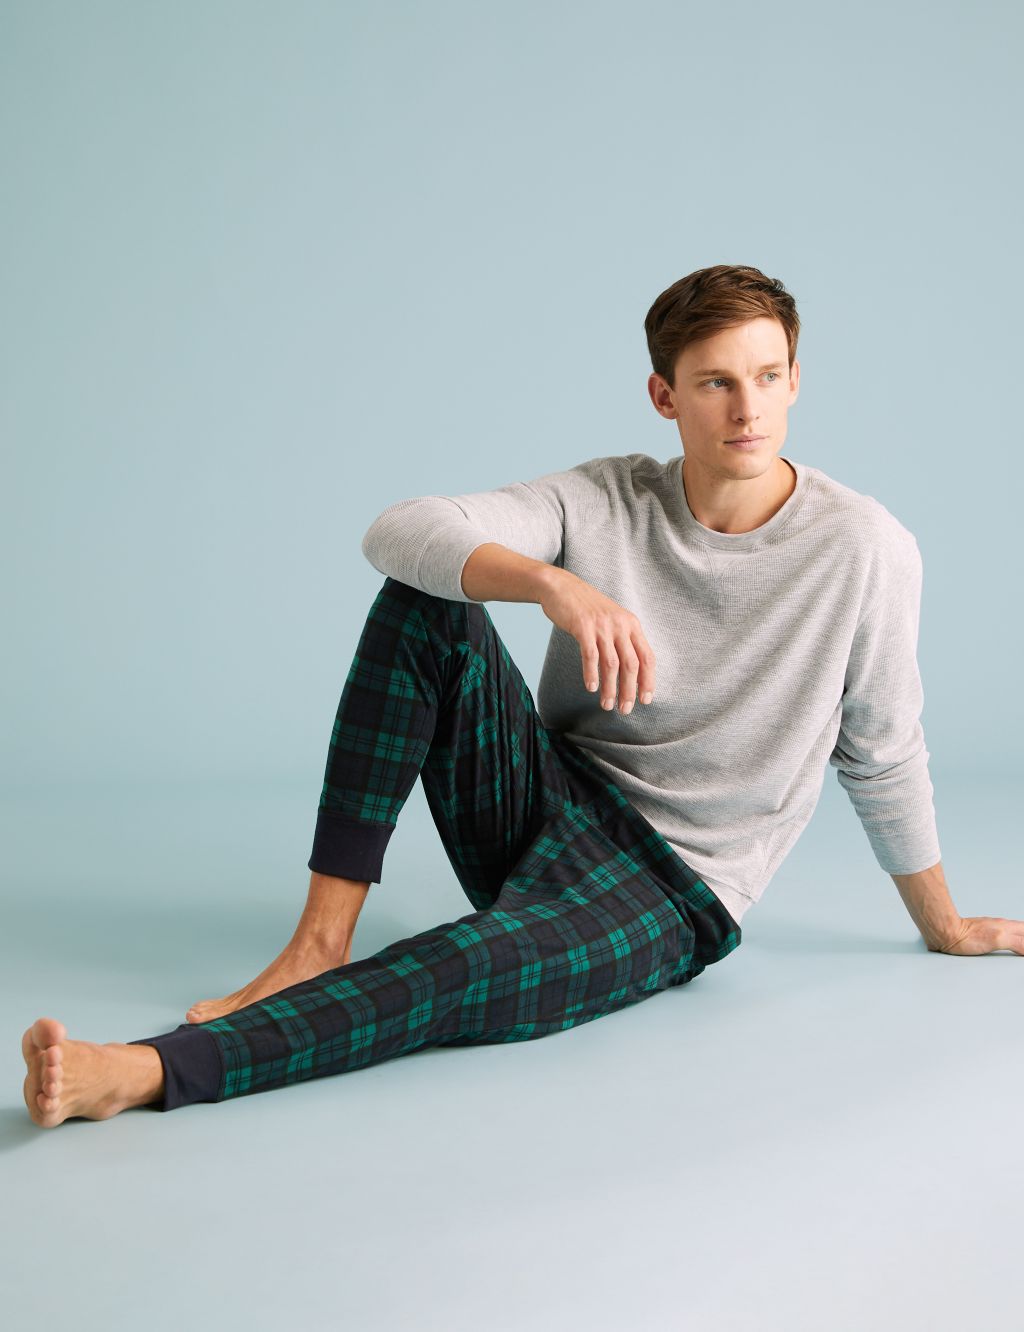 Supersoft Checked Pyjama Bottoms | M&S Collection | M&S